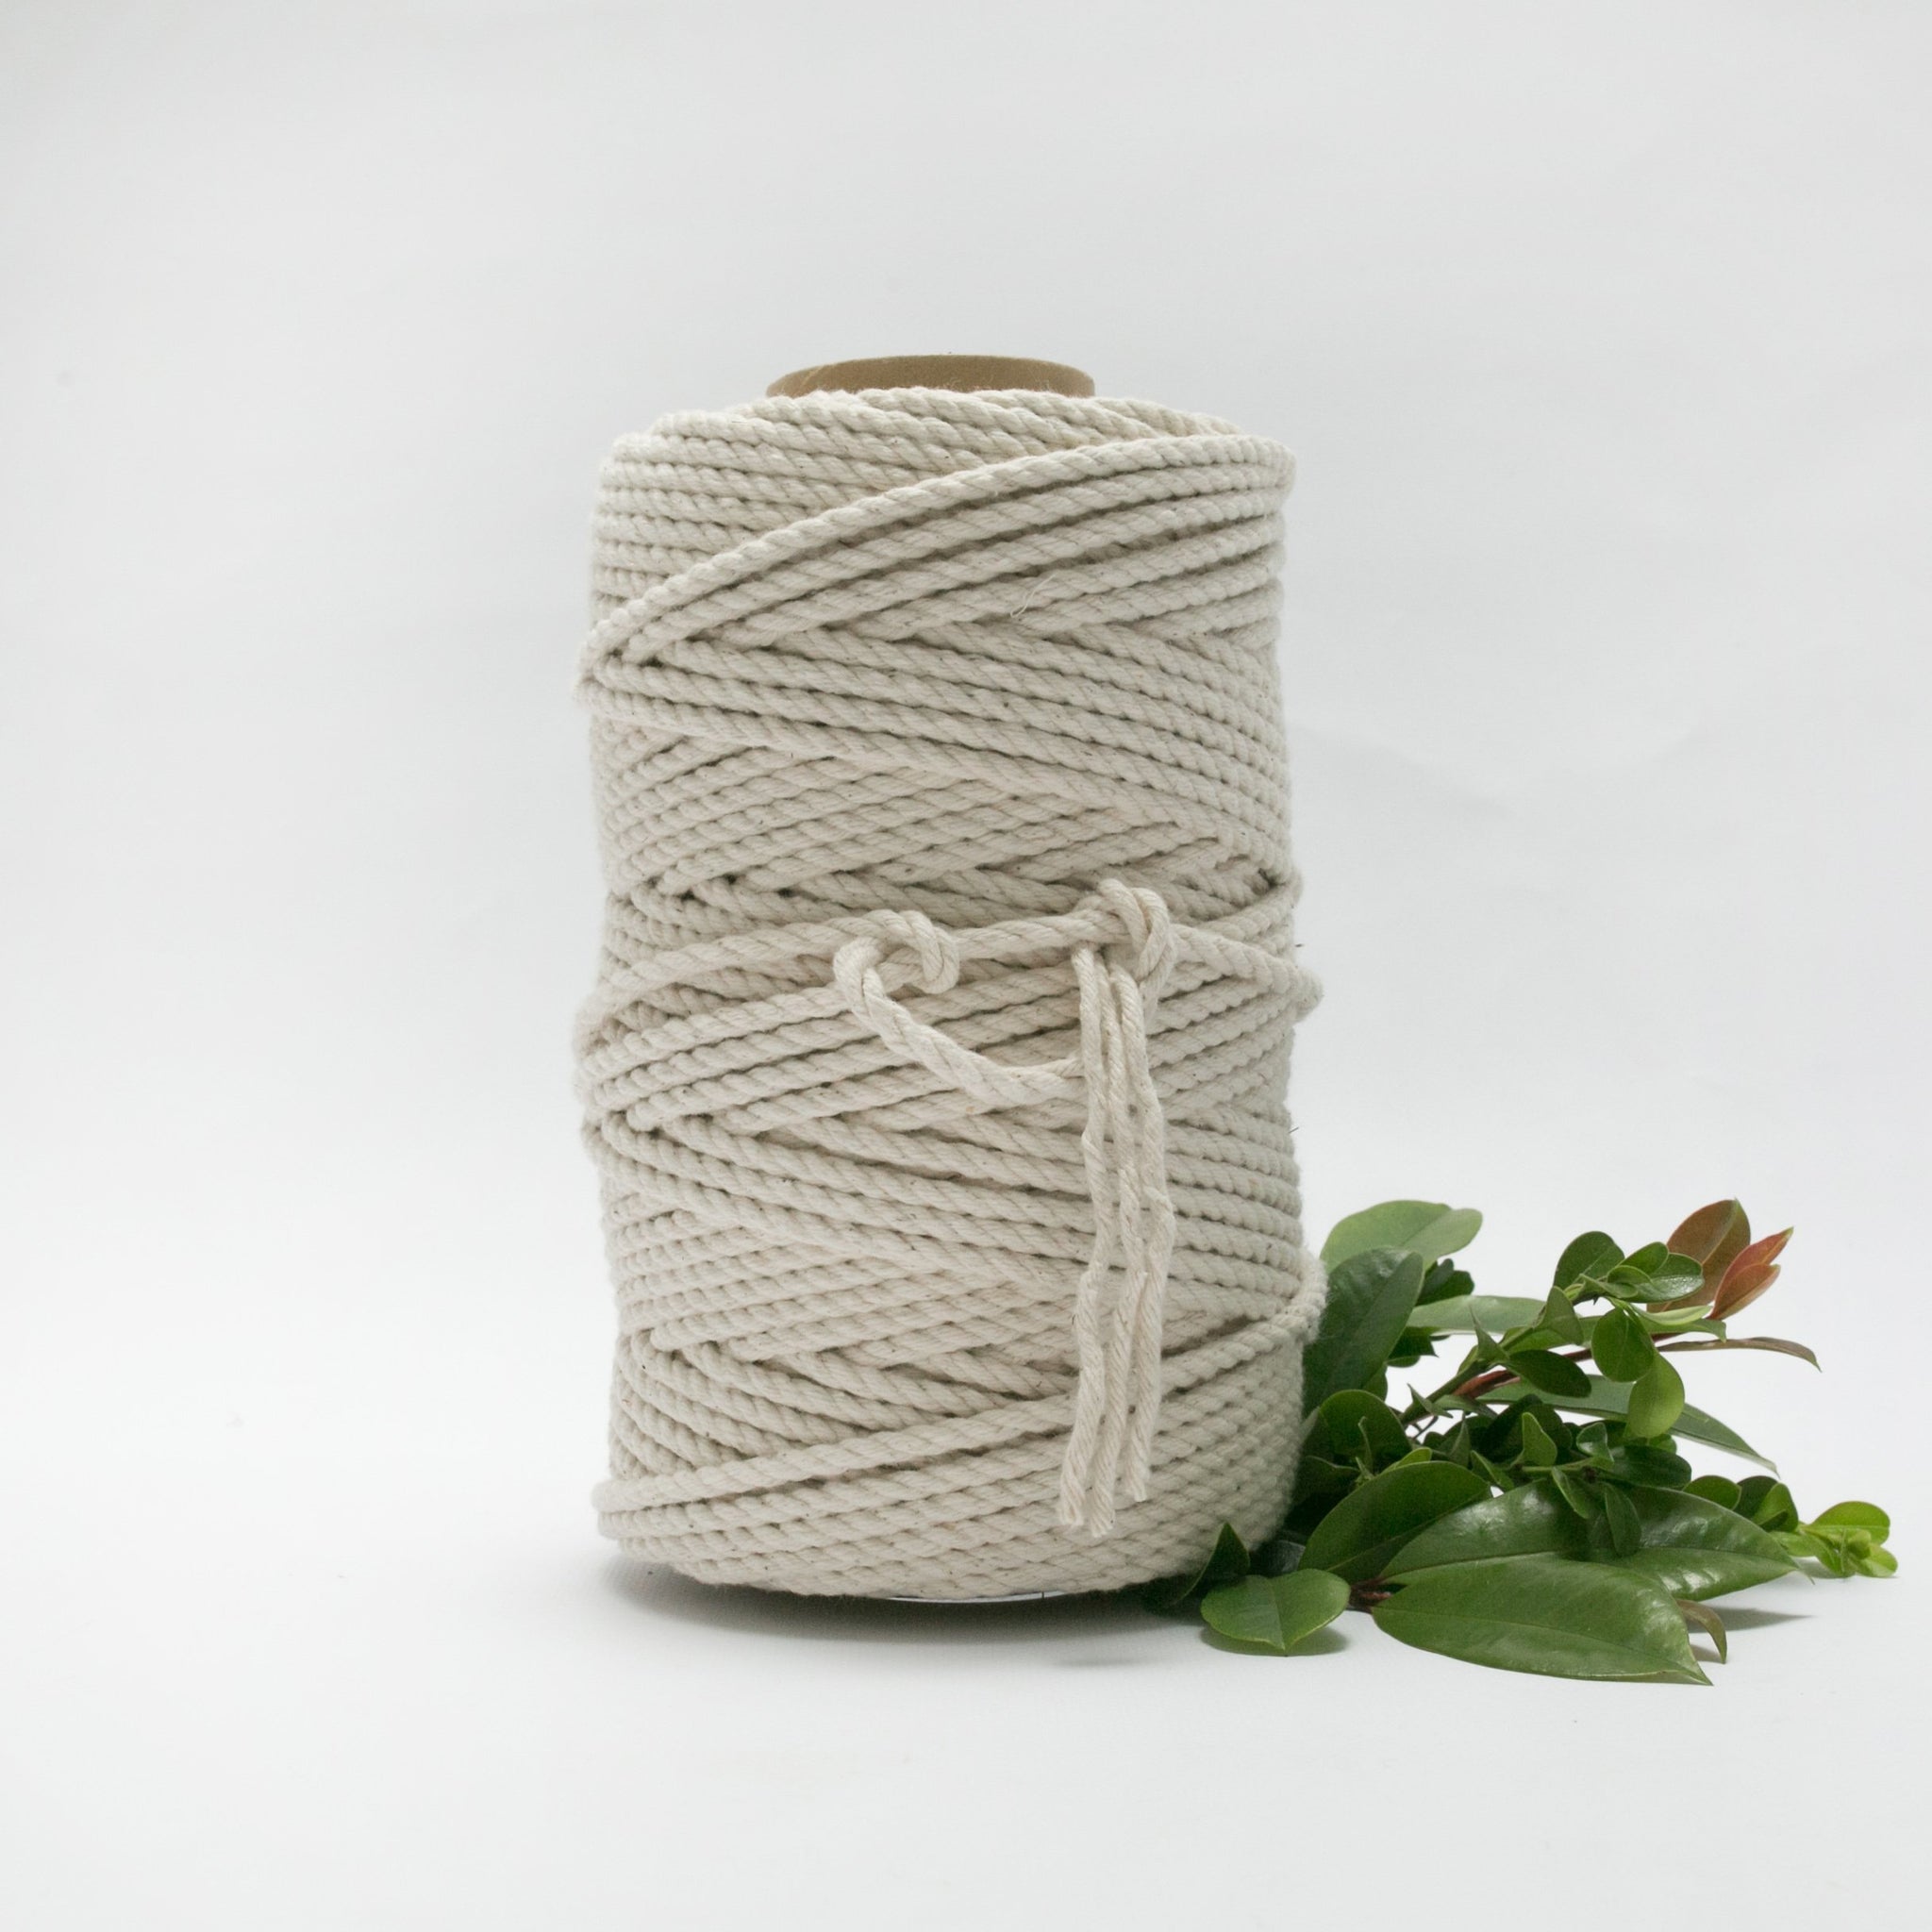 7mm - Macrame Cotton Rope / Wholesale Available - Mary Maker Studio -  Macrame & Weaving Supplies and Education.